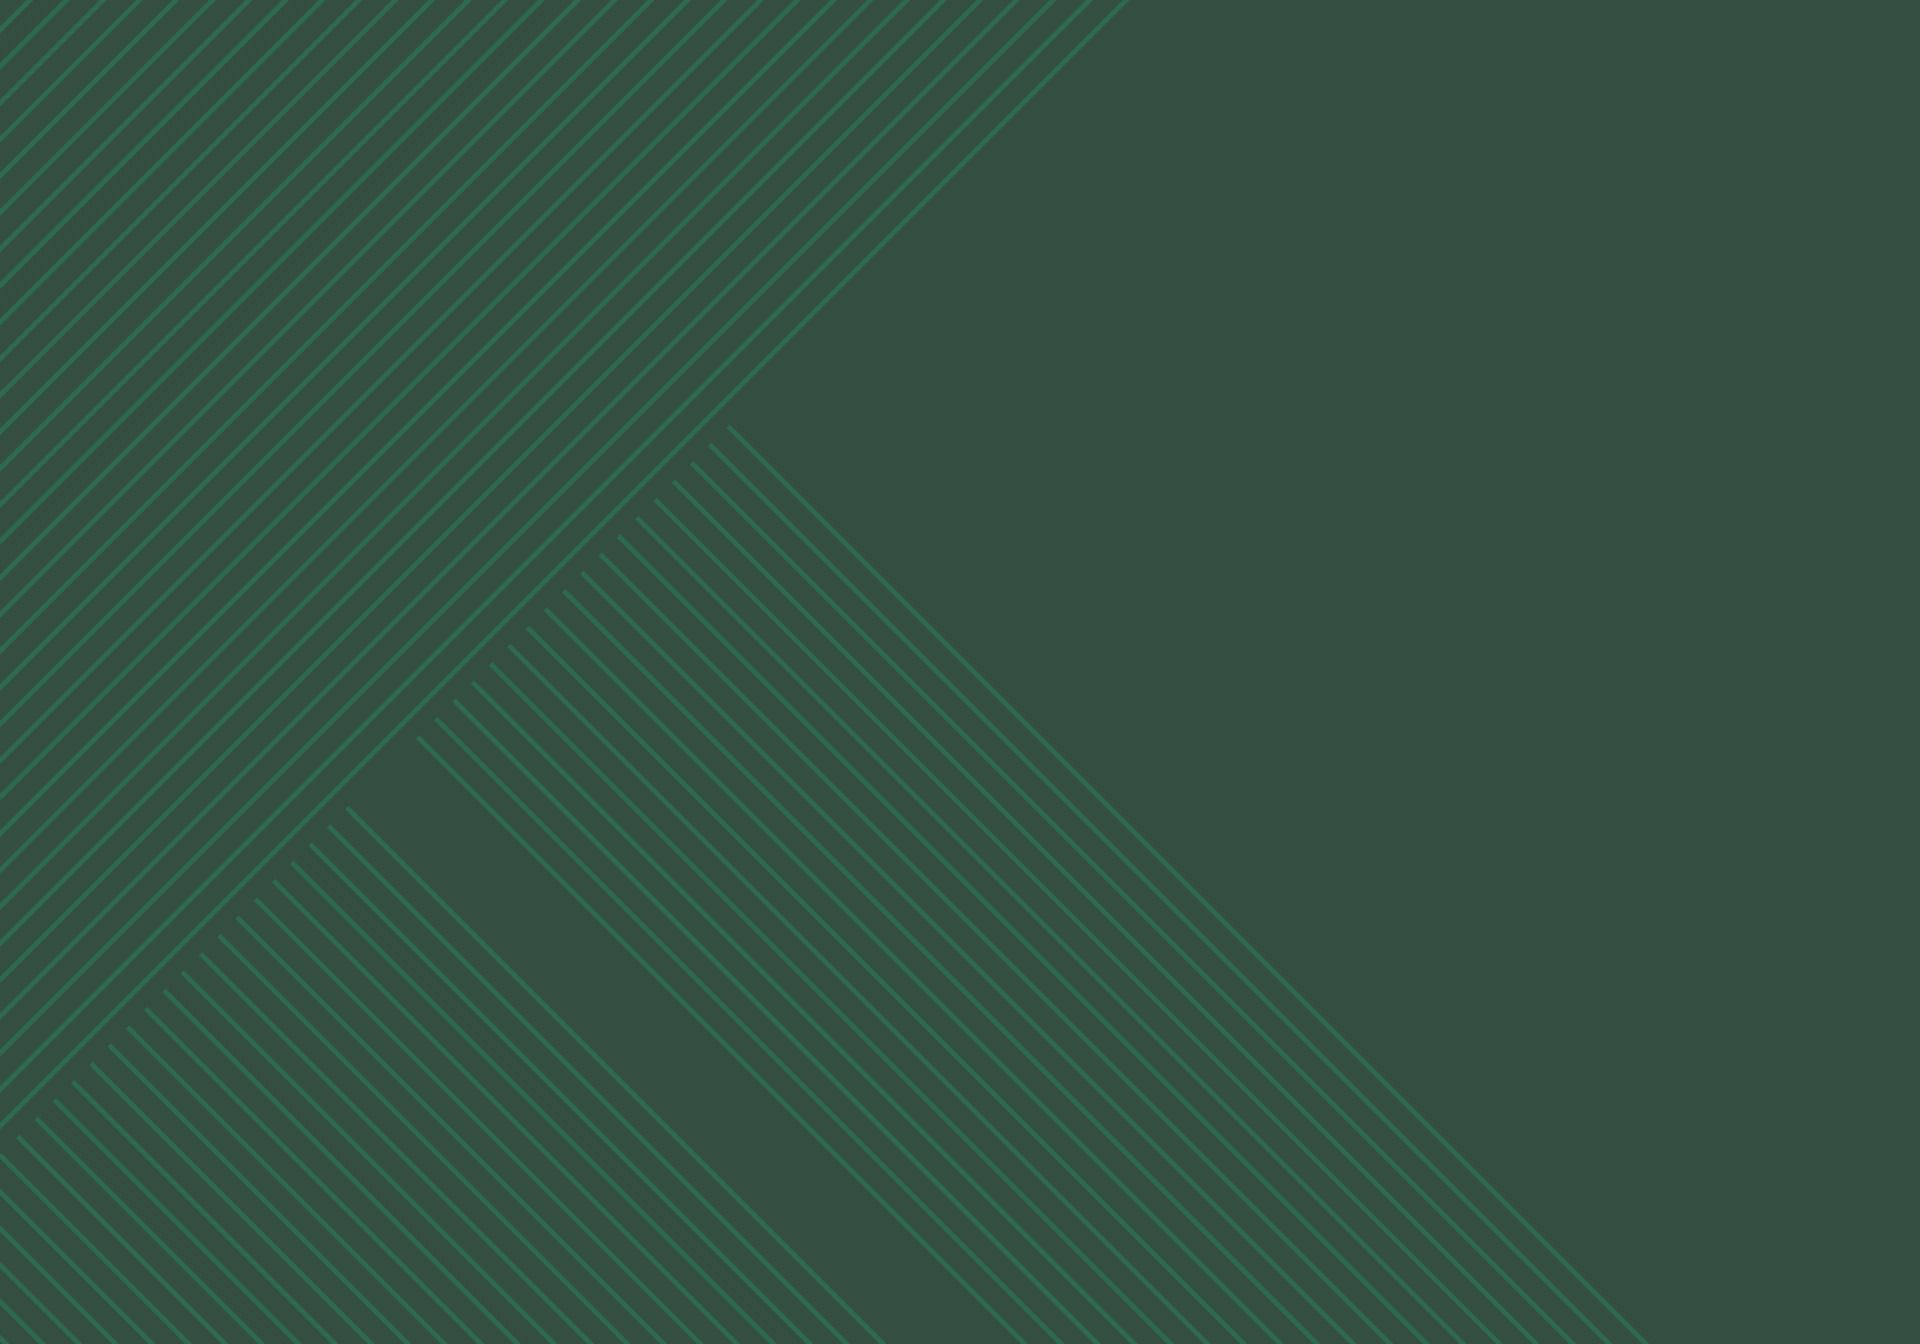 A dark green background with diagonal lines at the center - Dark green